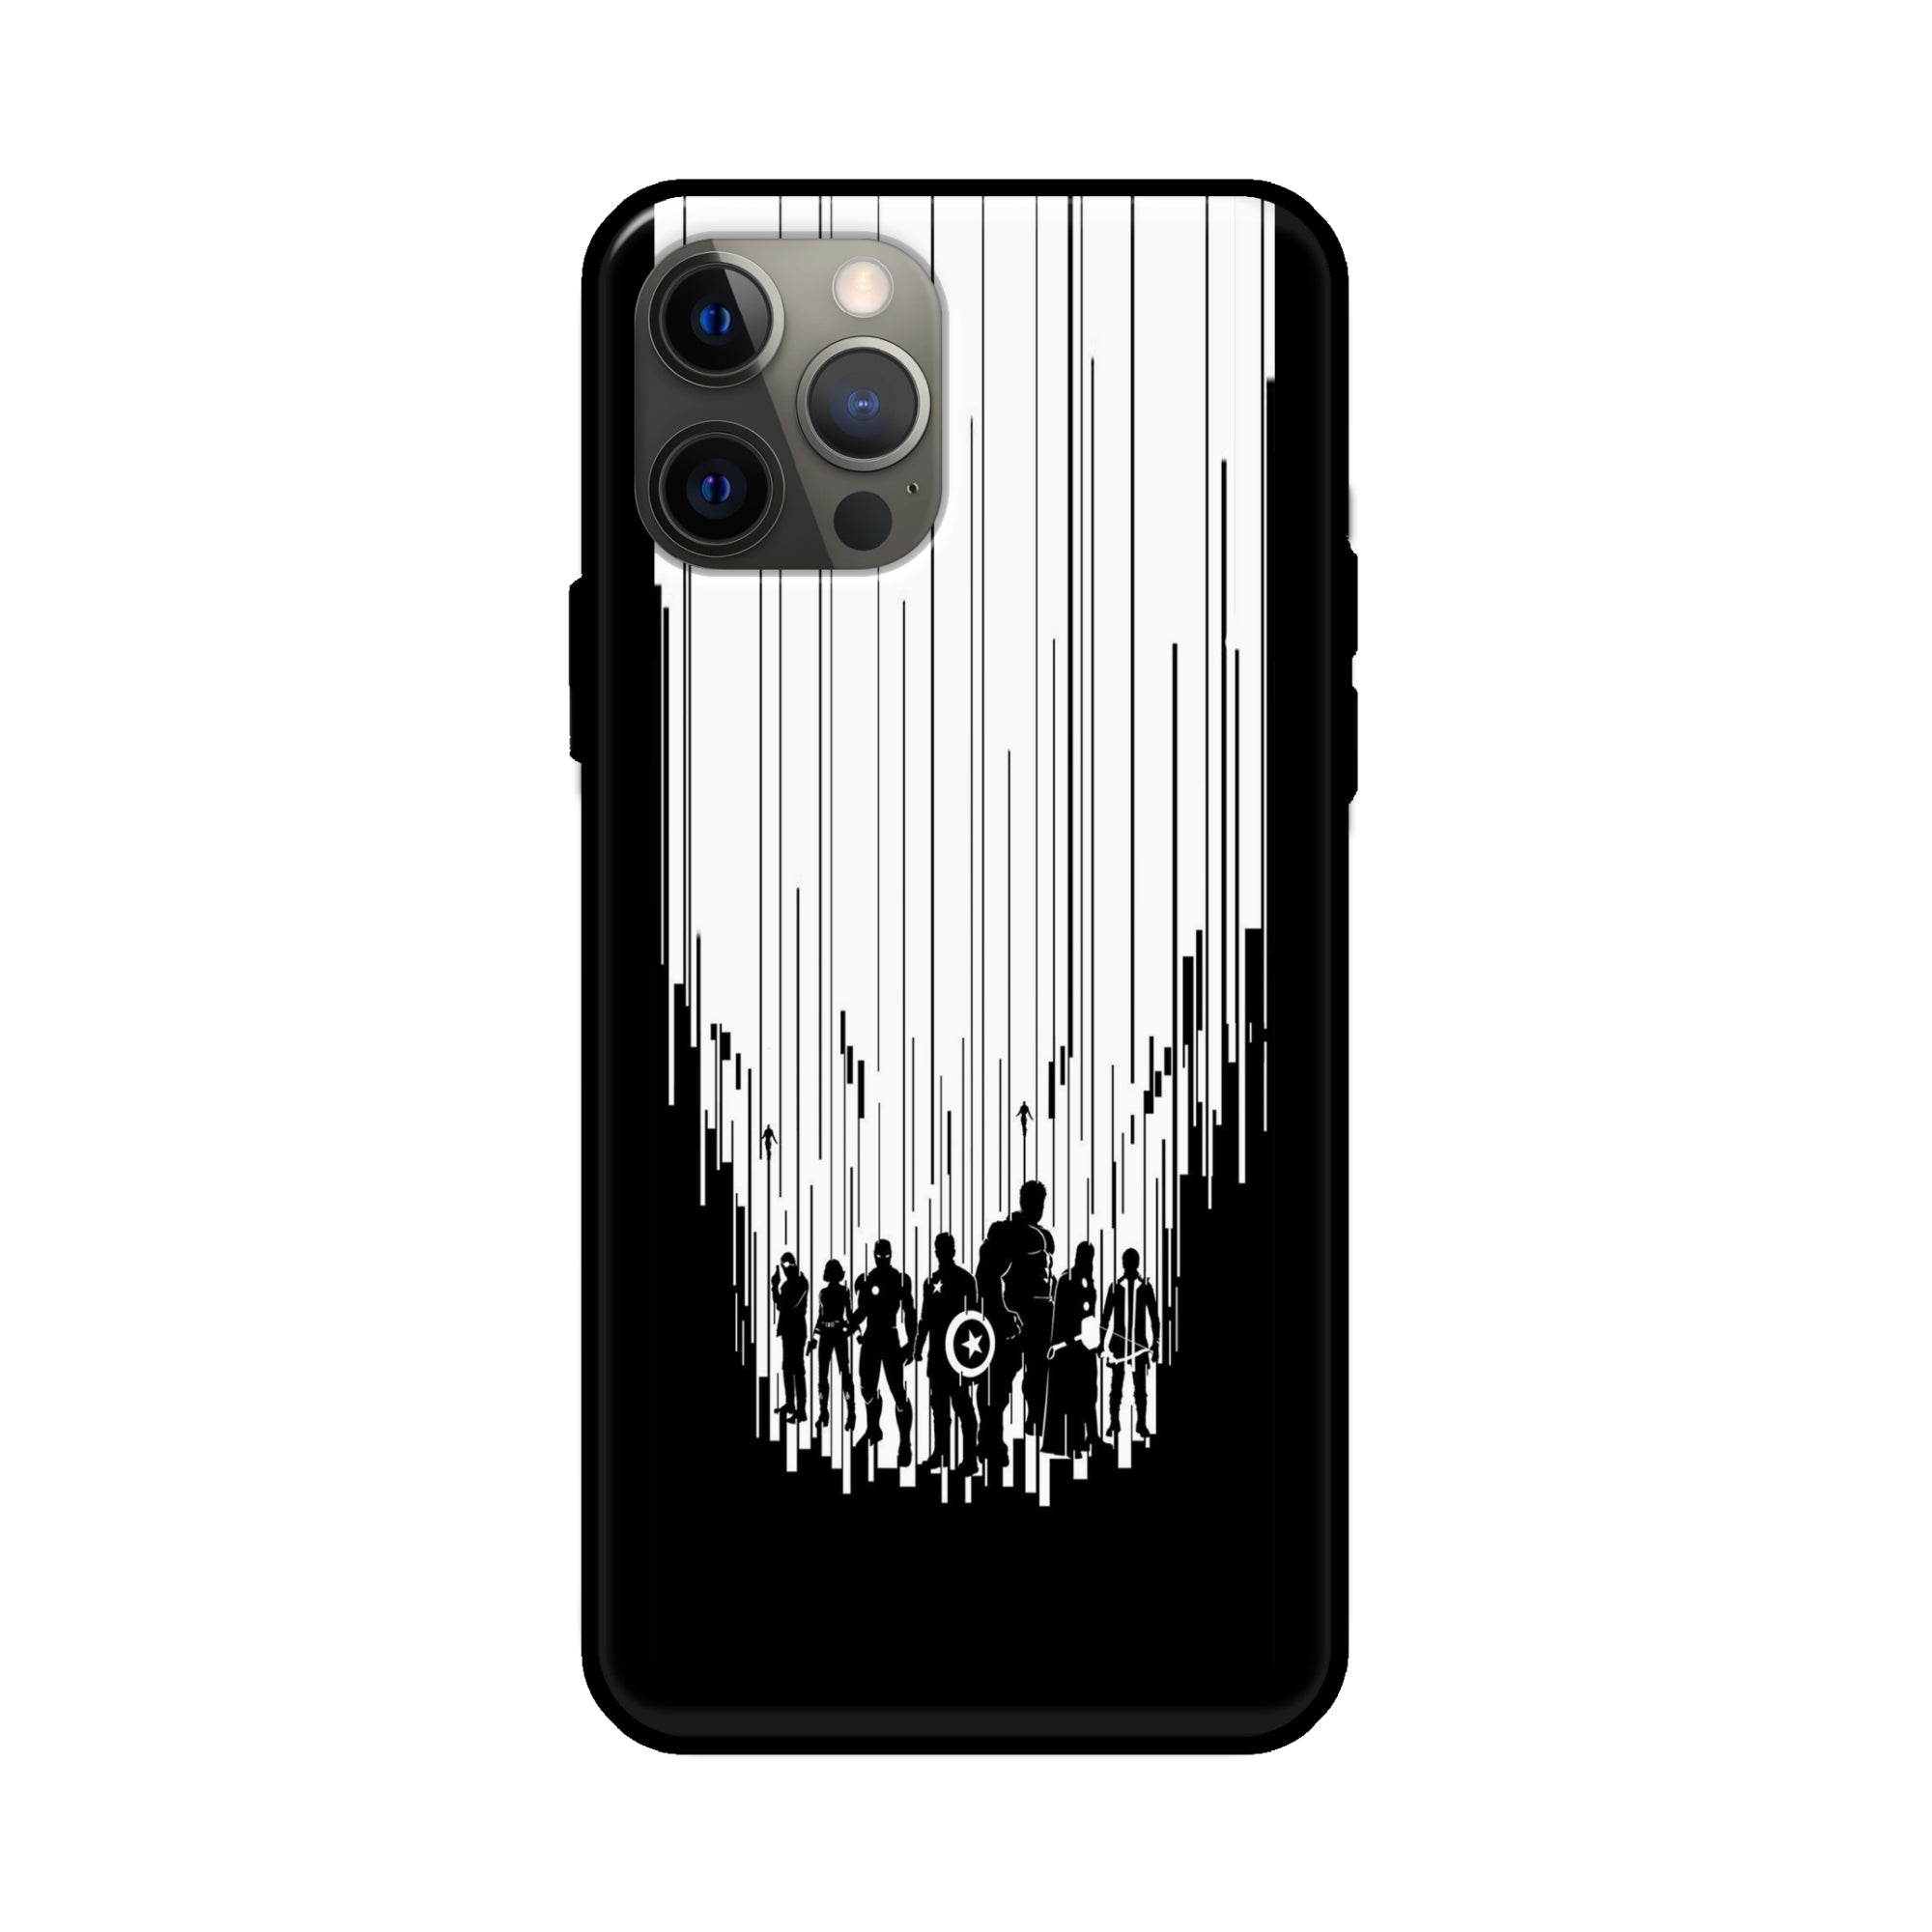 Buy Black And White Avanegers Glass/Metal Back Mobile Phone Case/Cover For Apple iPhone 12 pro max Online